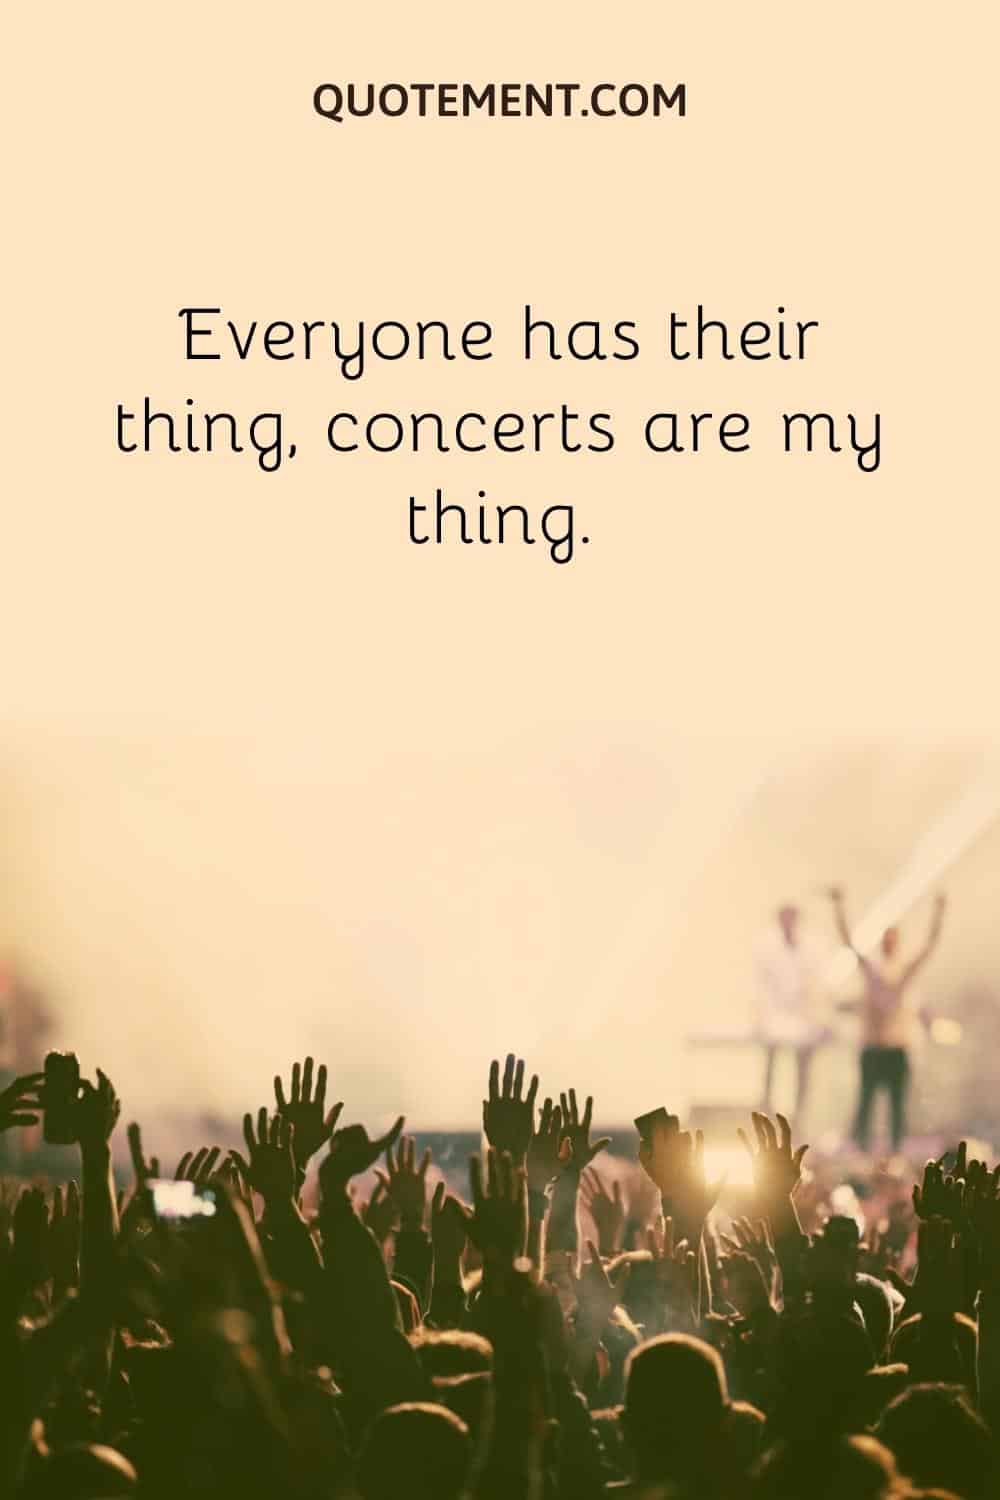 Everyone has their thing, concerts are my thing